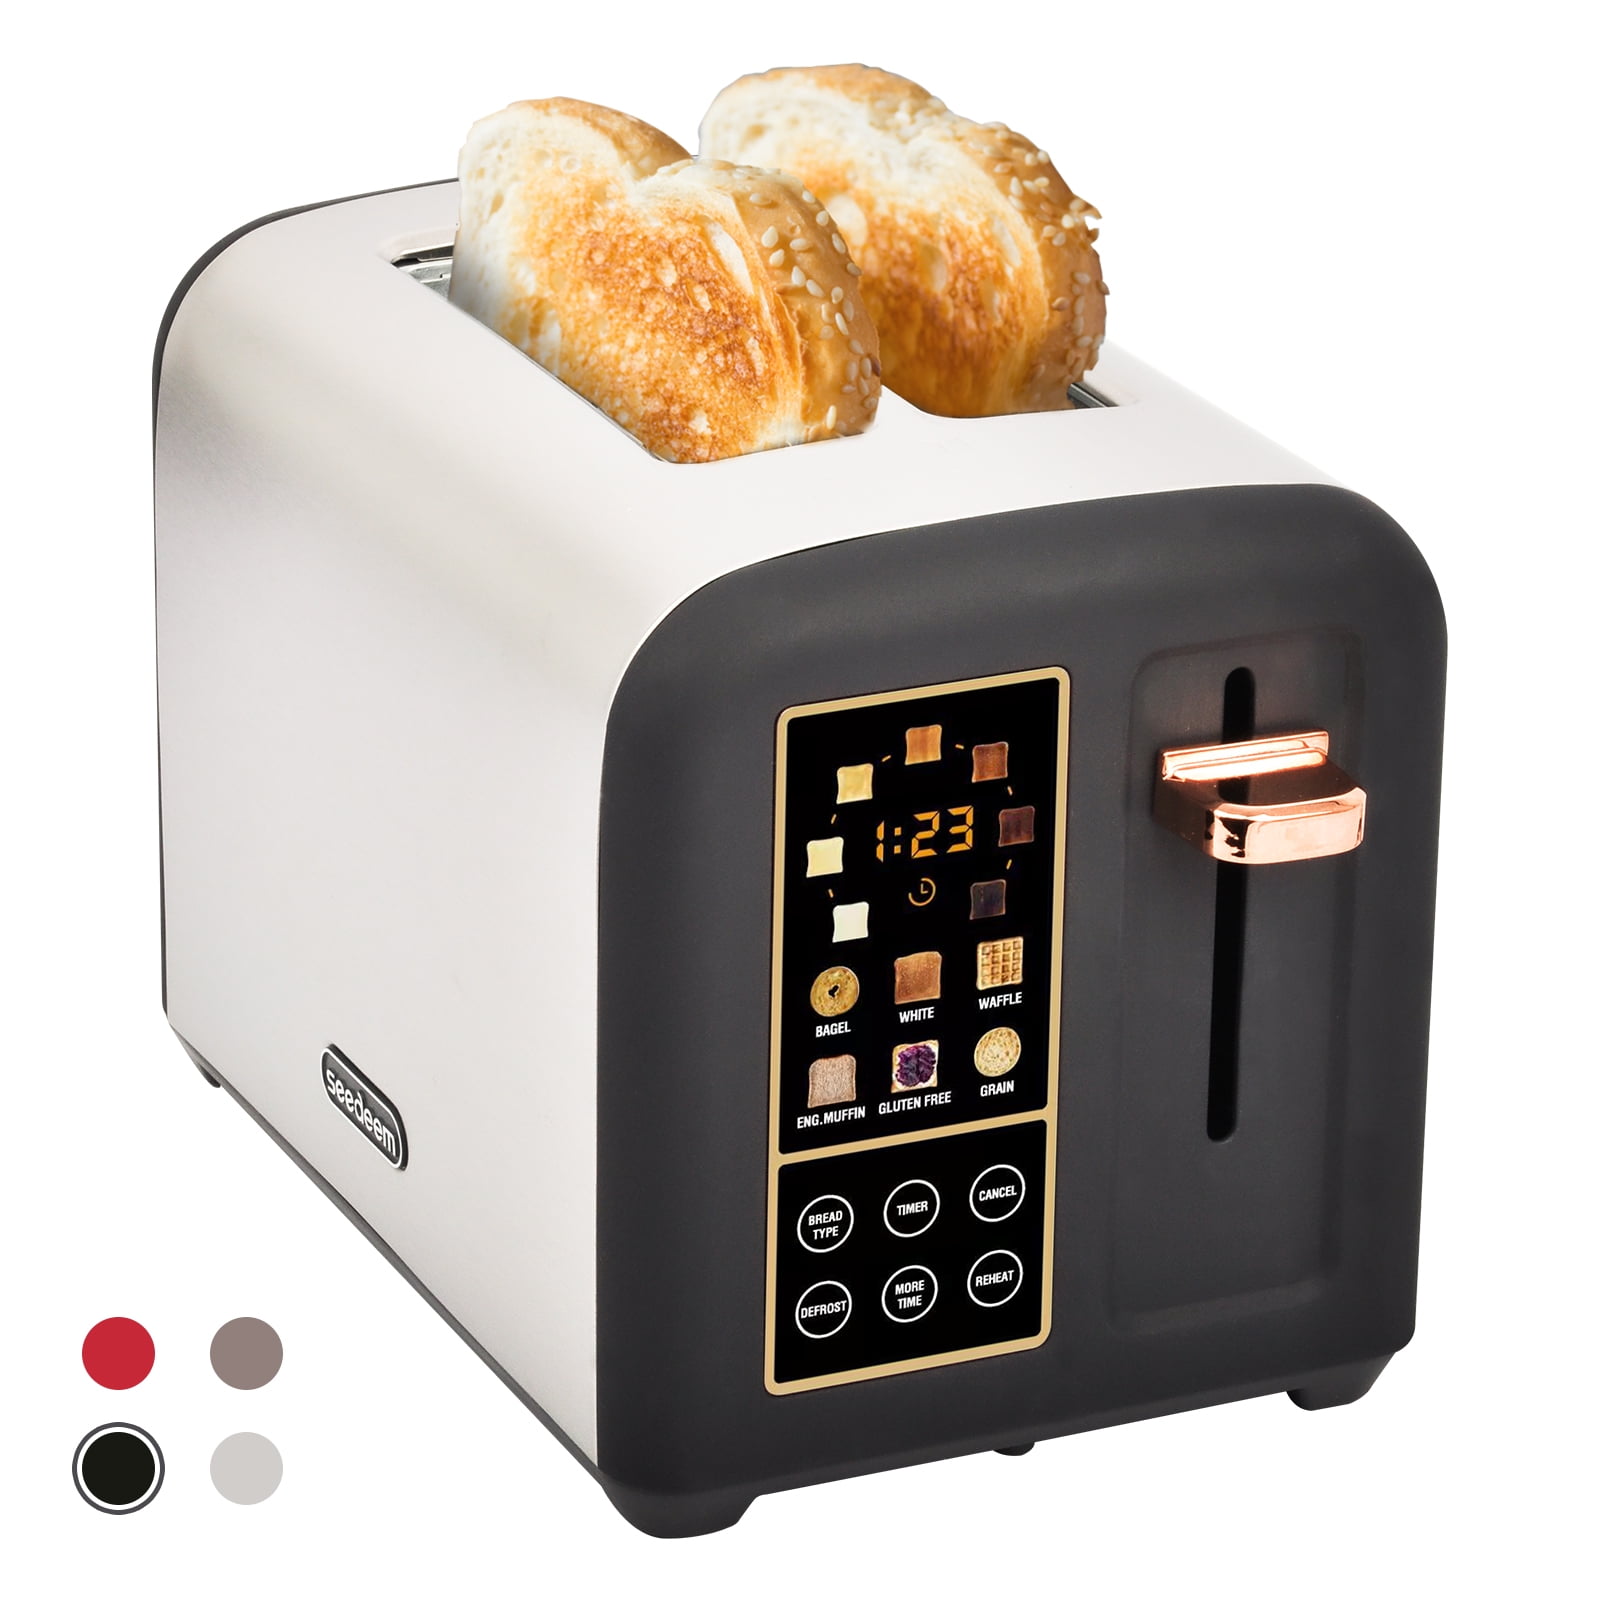 SEEDEEM Toaster 2 Slice, Stainless Steel Bread Toaster with Colorful LCD Display, 7 Bread Shade Settings, 14 Wide Slots Toaster